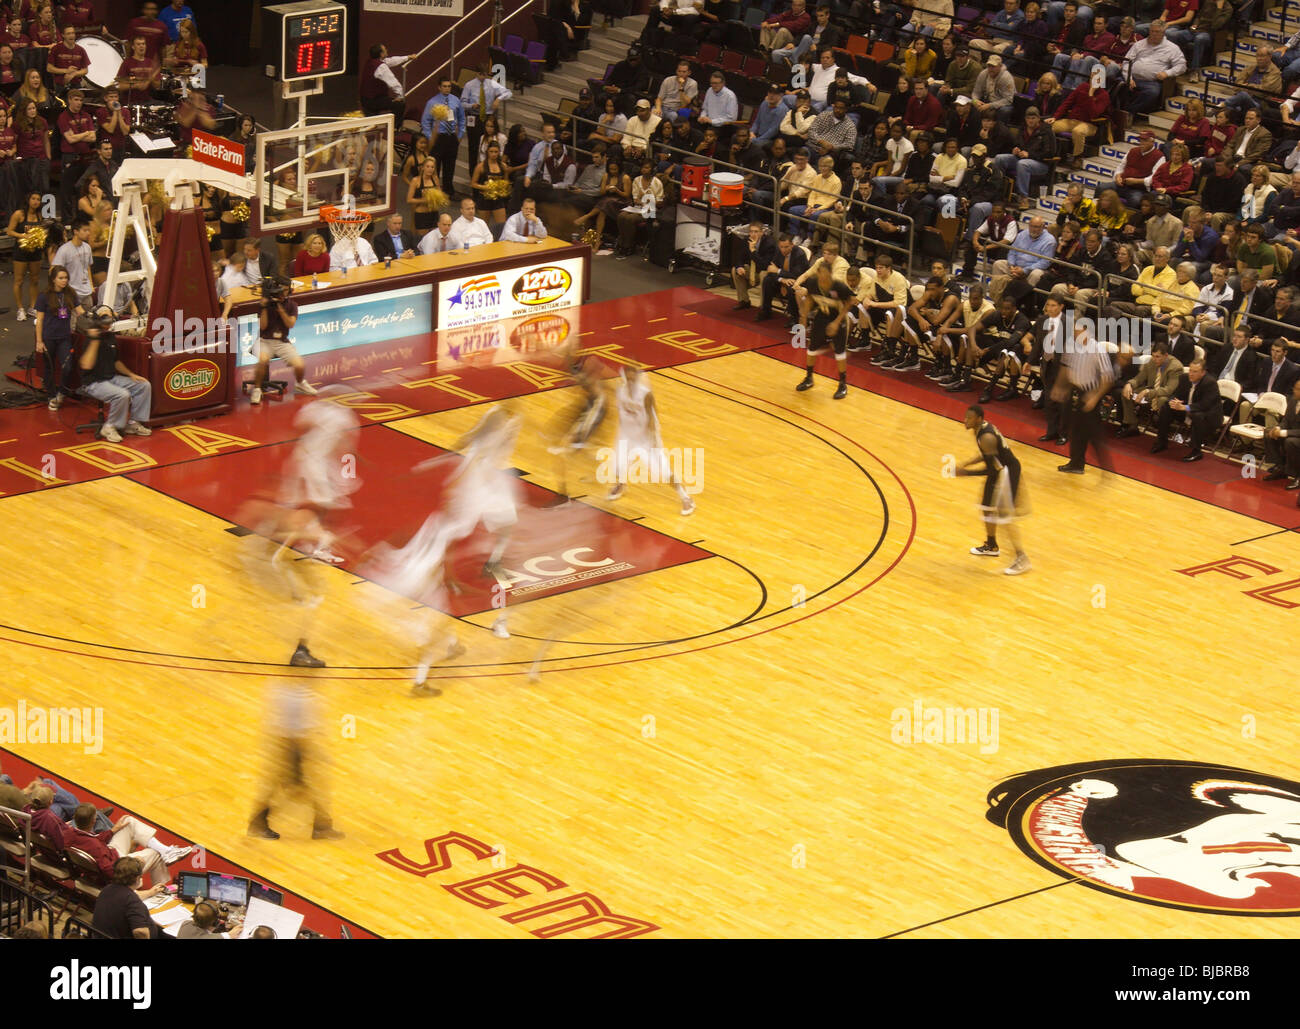 Fast action during basketball game at Florida State University in Tallahassee Stock Photo